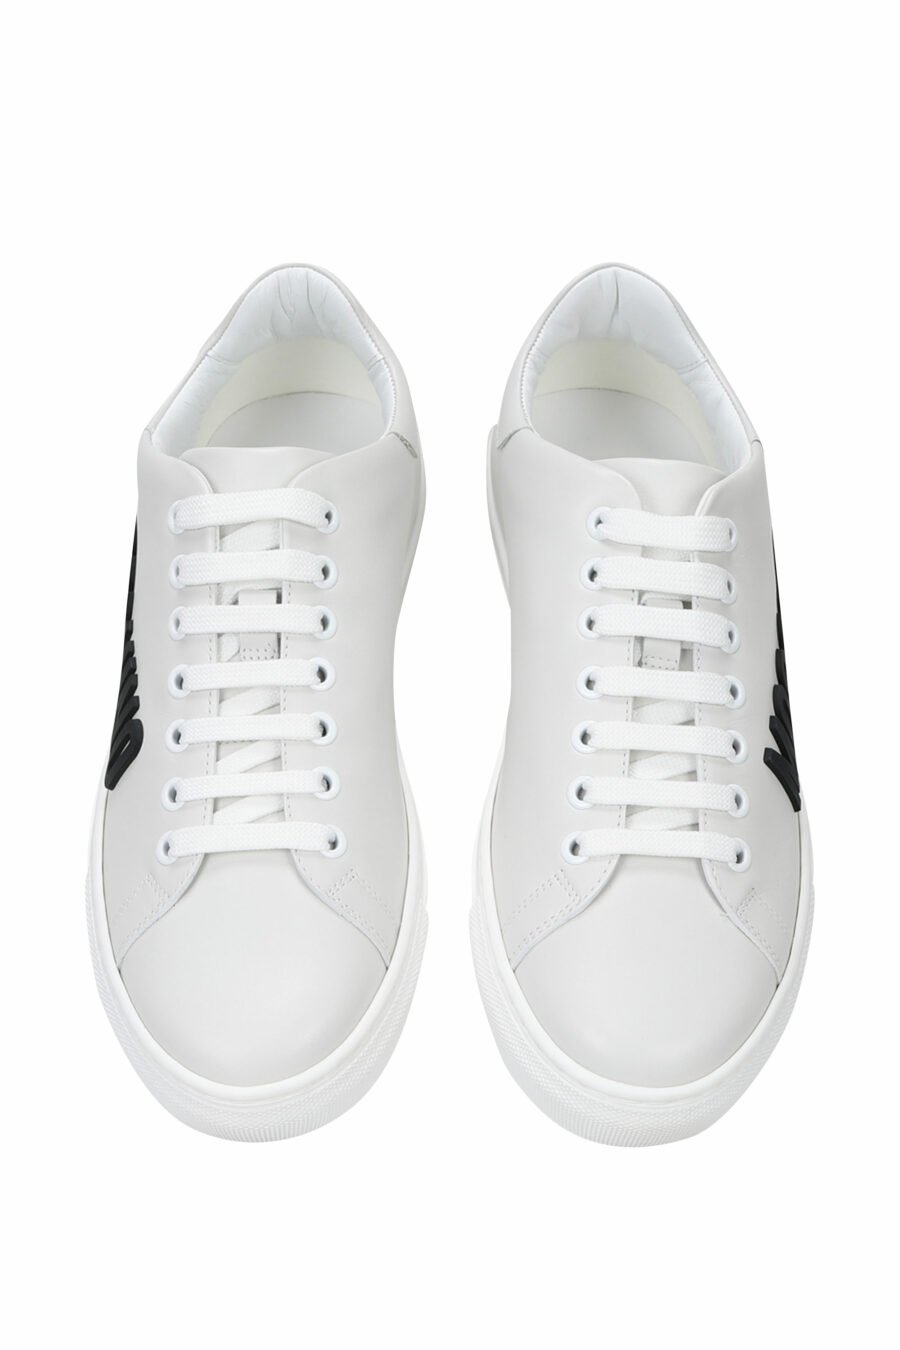 White trainers with black "lettering" logo - 8054653099241 4